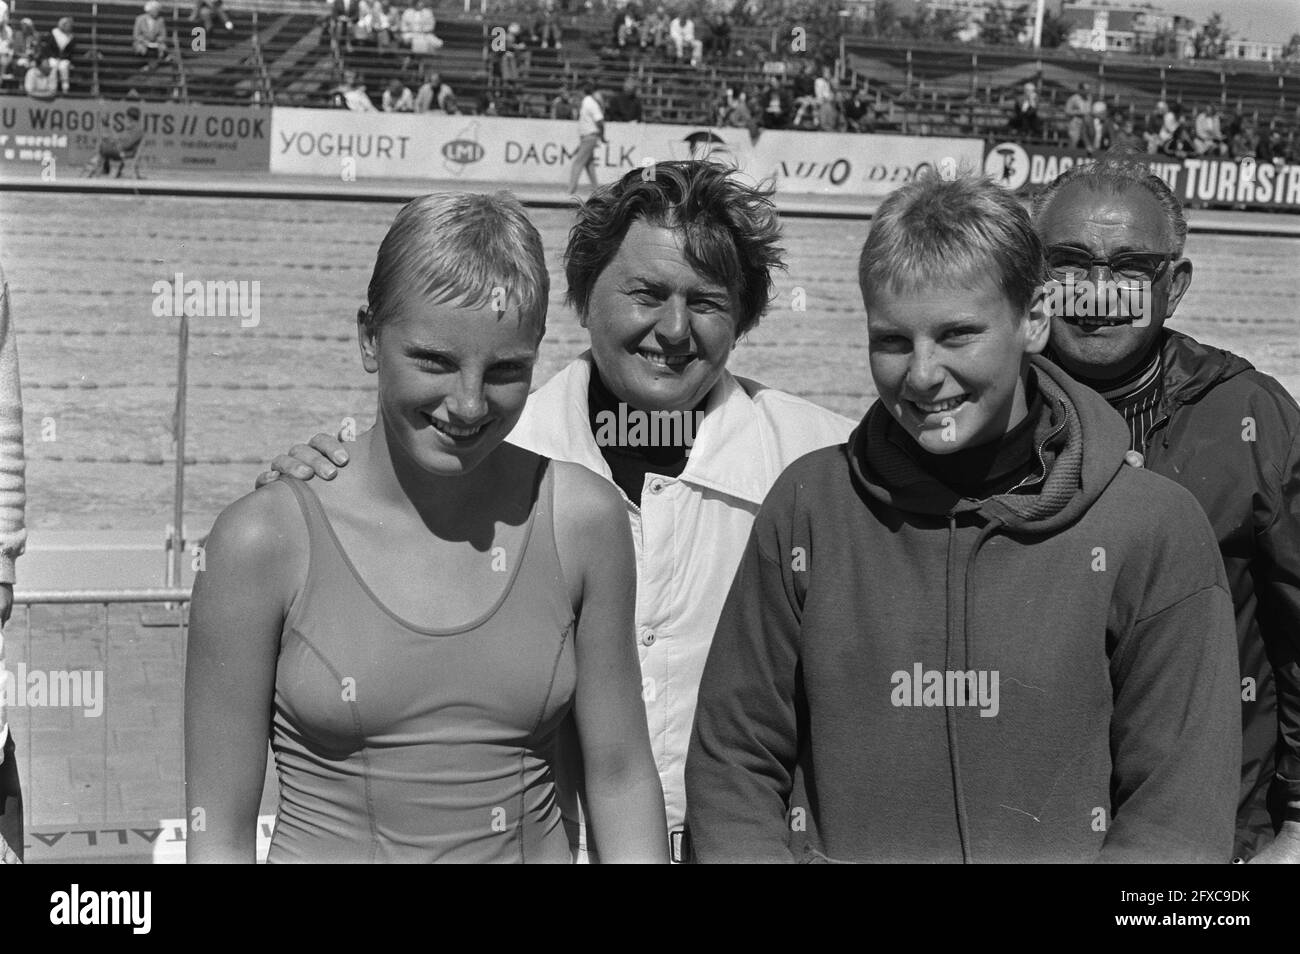 National Swimming Championships in Leeuwarden; from left to right Hansje Bunschoten, Wil Bunschoten (trainer Naarden), Linda de Boer (head), July 22, 1970, CHAMPIONSHIP, SWIMMING, trainers, The Netherlands, 20th century press agency photo, news to remember, documentary, historic photography 1945-1990, visual stories, human history of the Twentieth Century, capturing moments in time Stock Photo